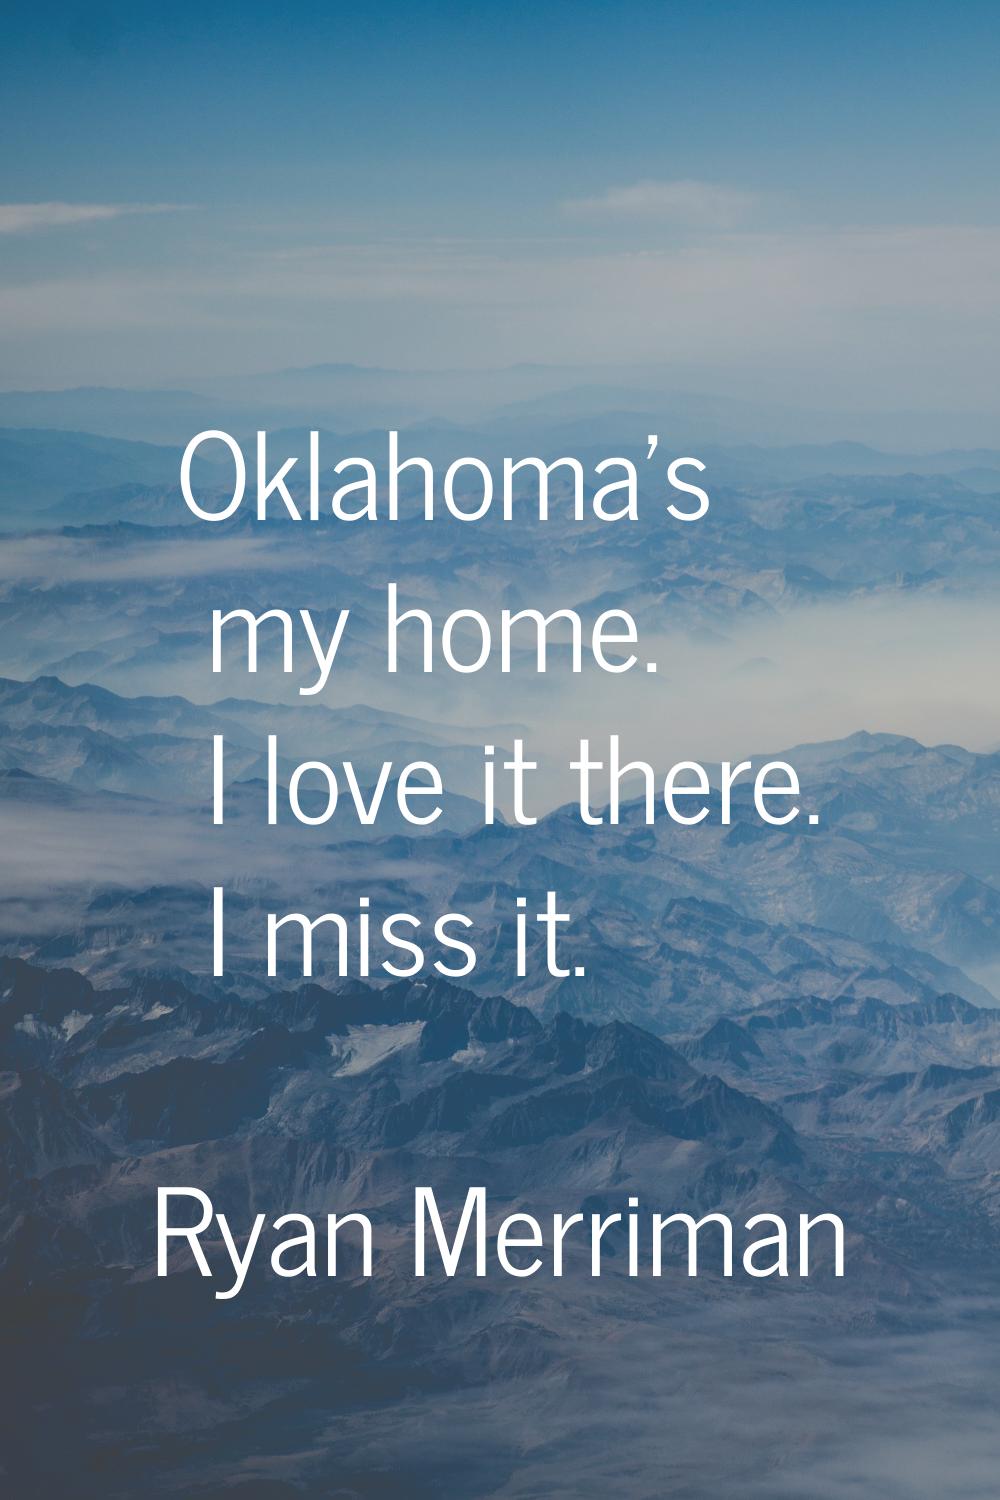 Oklahoma's my home. I love it there. I miss it.